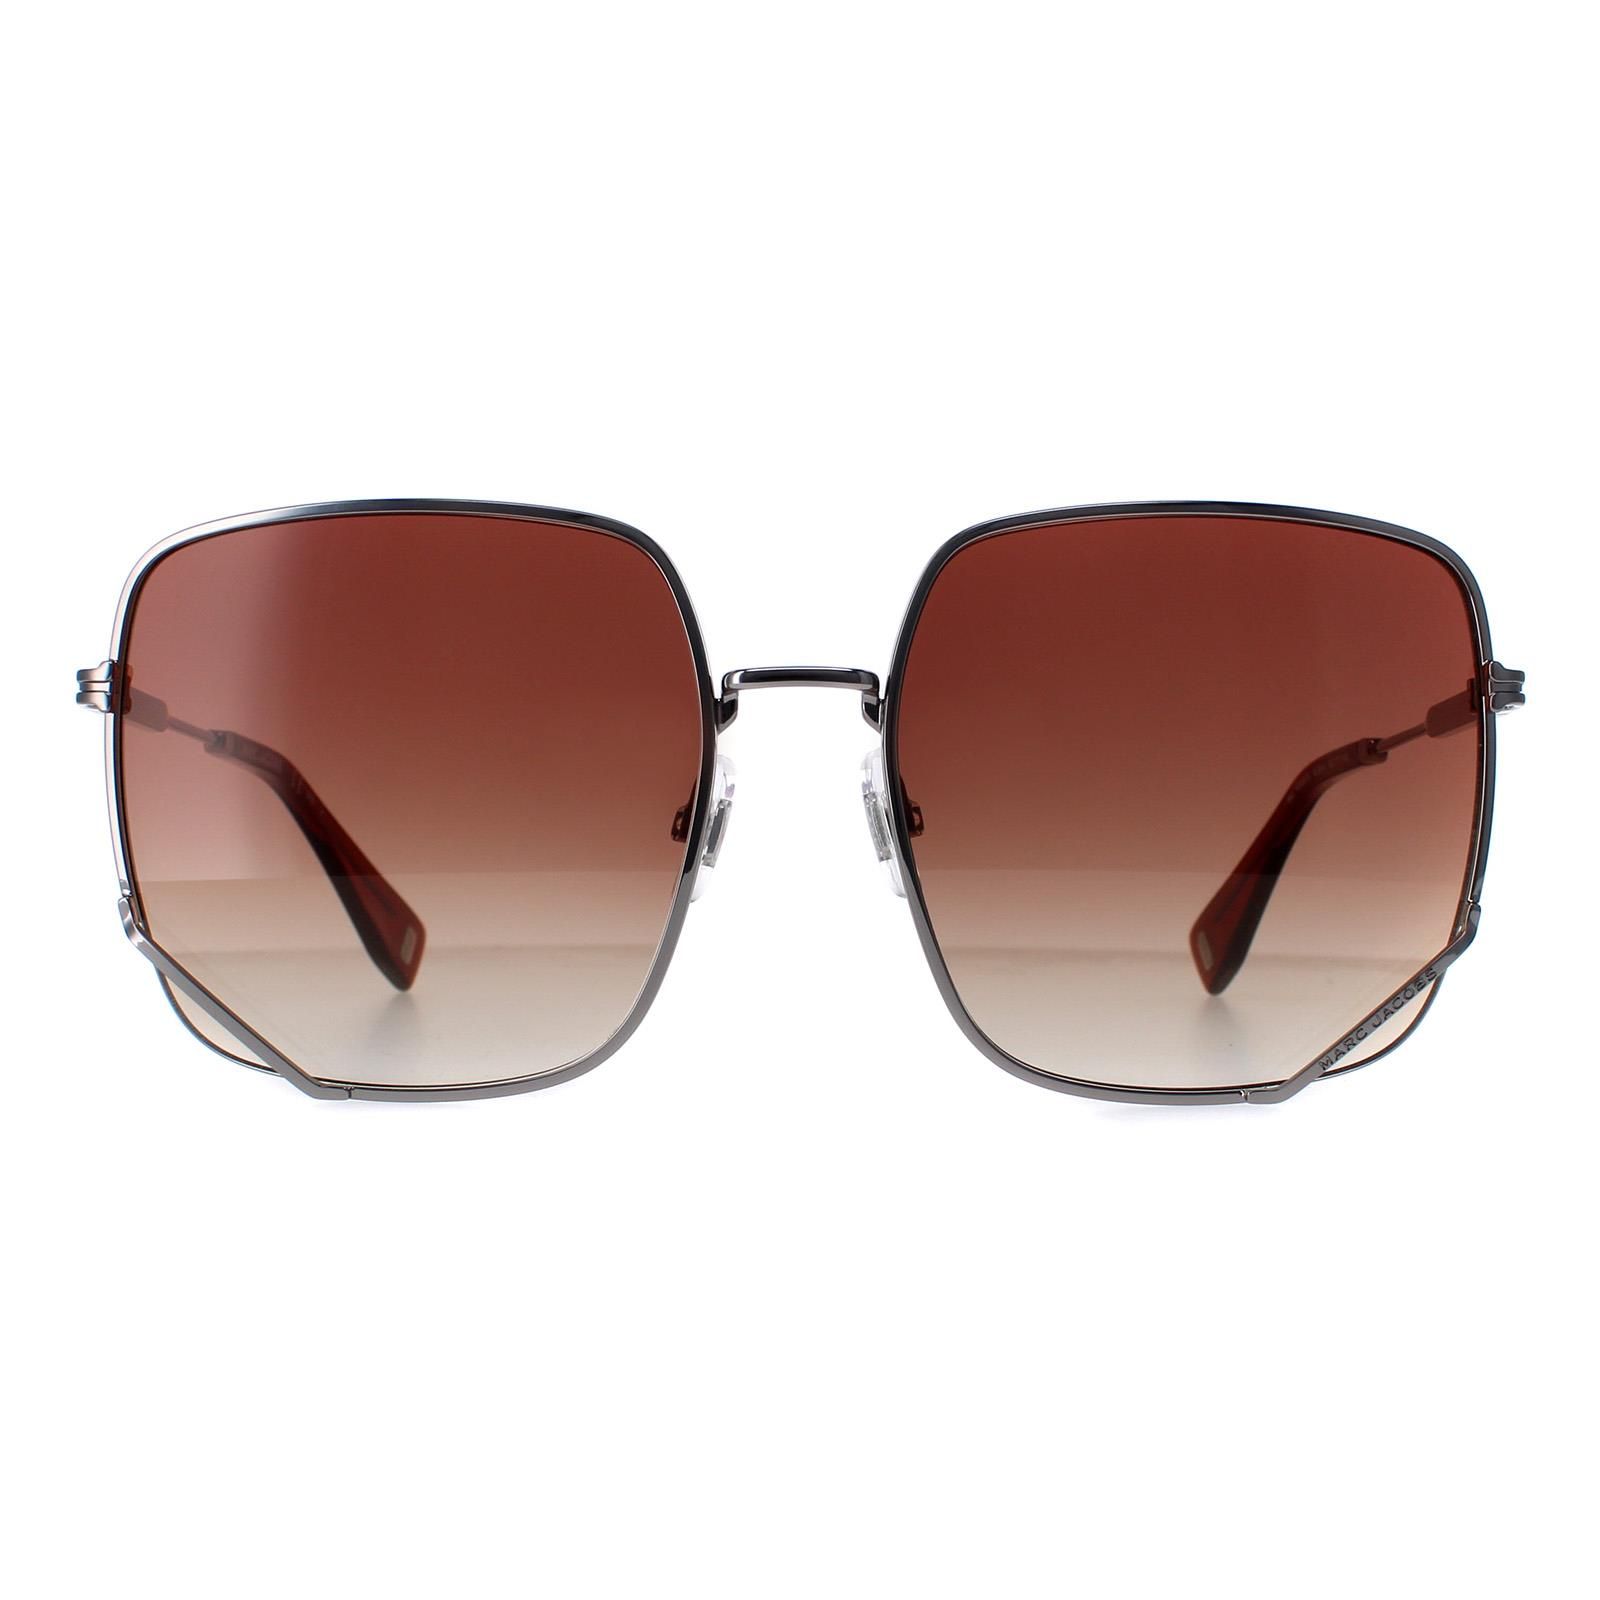 Marc Jacobs Square Womens Ruthenium Grey Brown Gradient MJ 1008/S  Sunglasses feature a lightweight and durable metal square frame that provides a comfortable and secure fit.  Adjustable nose pads and plastic temple tips provide a comfortable and customized fit.  The temples are adorned with the iconic Marc Jacobs logo, adding a touch of elegance and sophistication to the overall look.